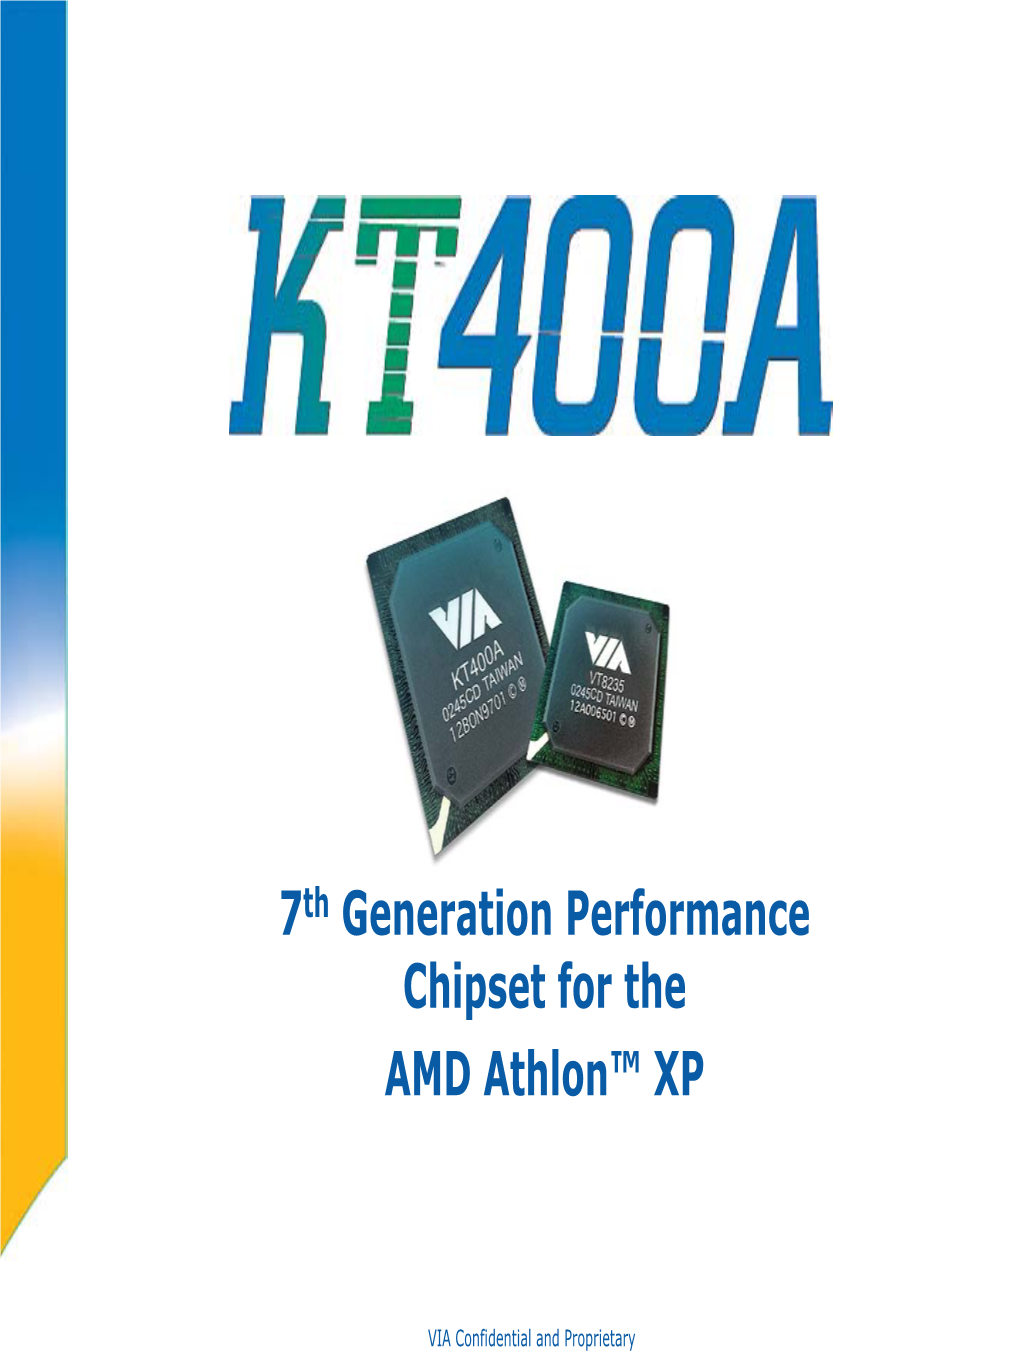 7Th Generation Performance Chipset for the AMD Athlon™ XP